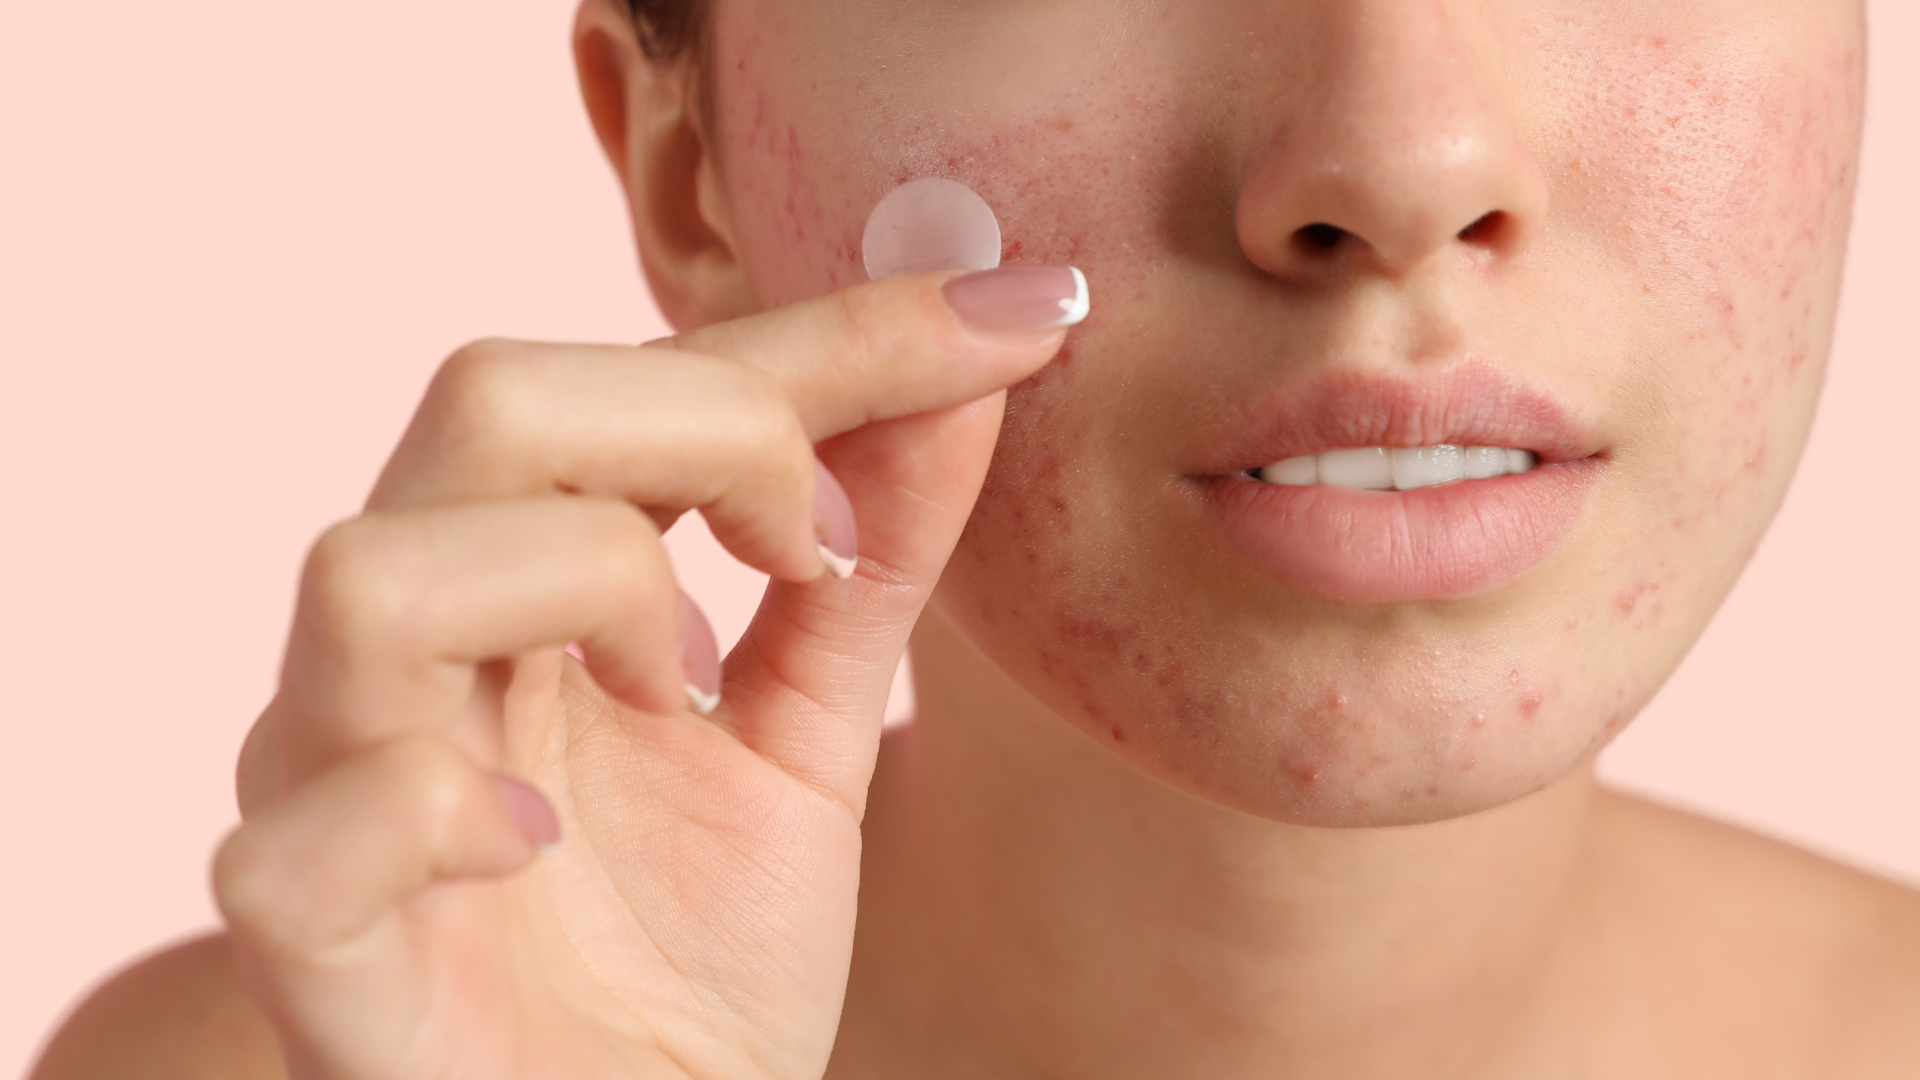 Pimple Patch 101: The Do’s and Don’ts of Pimple Patches for Redheads